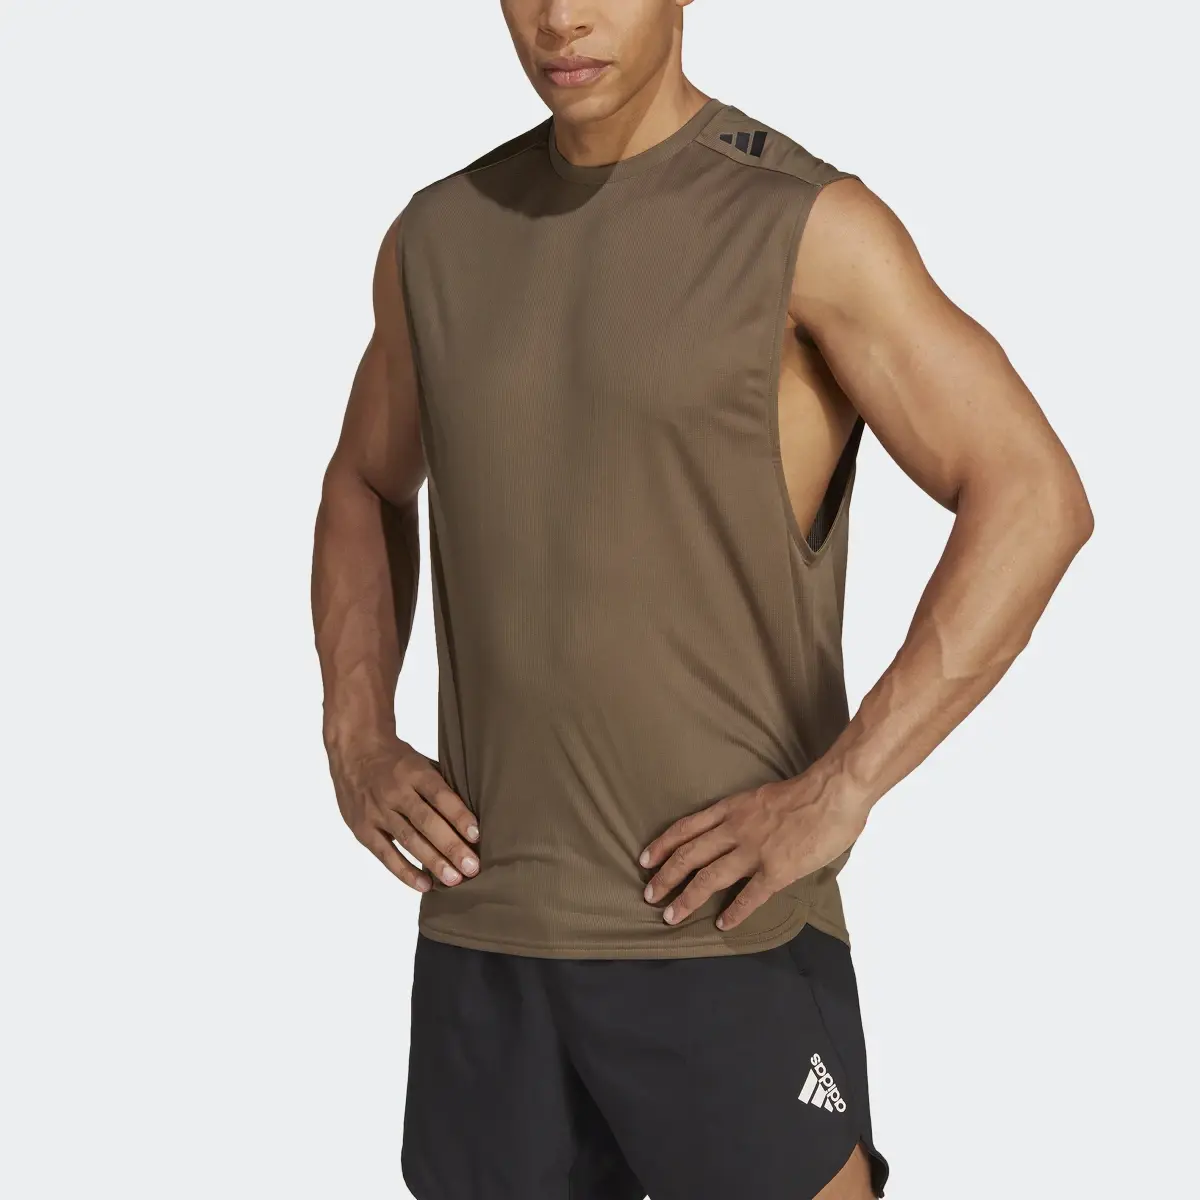 Adidas HIIT Tank Top Curated By Cody Rigsby. 1